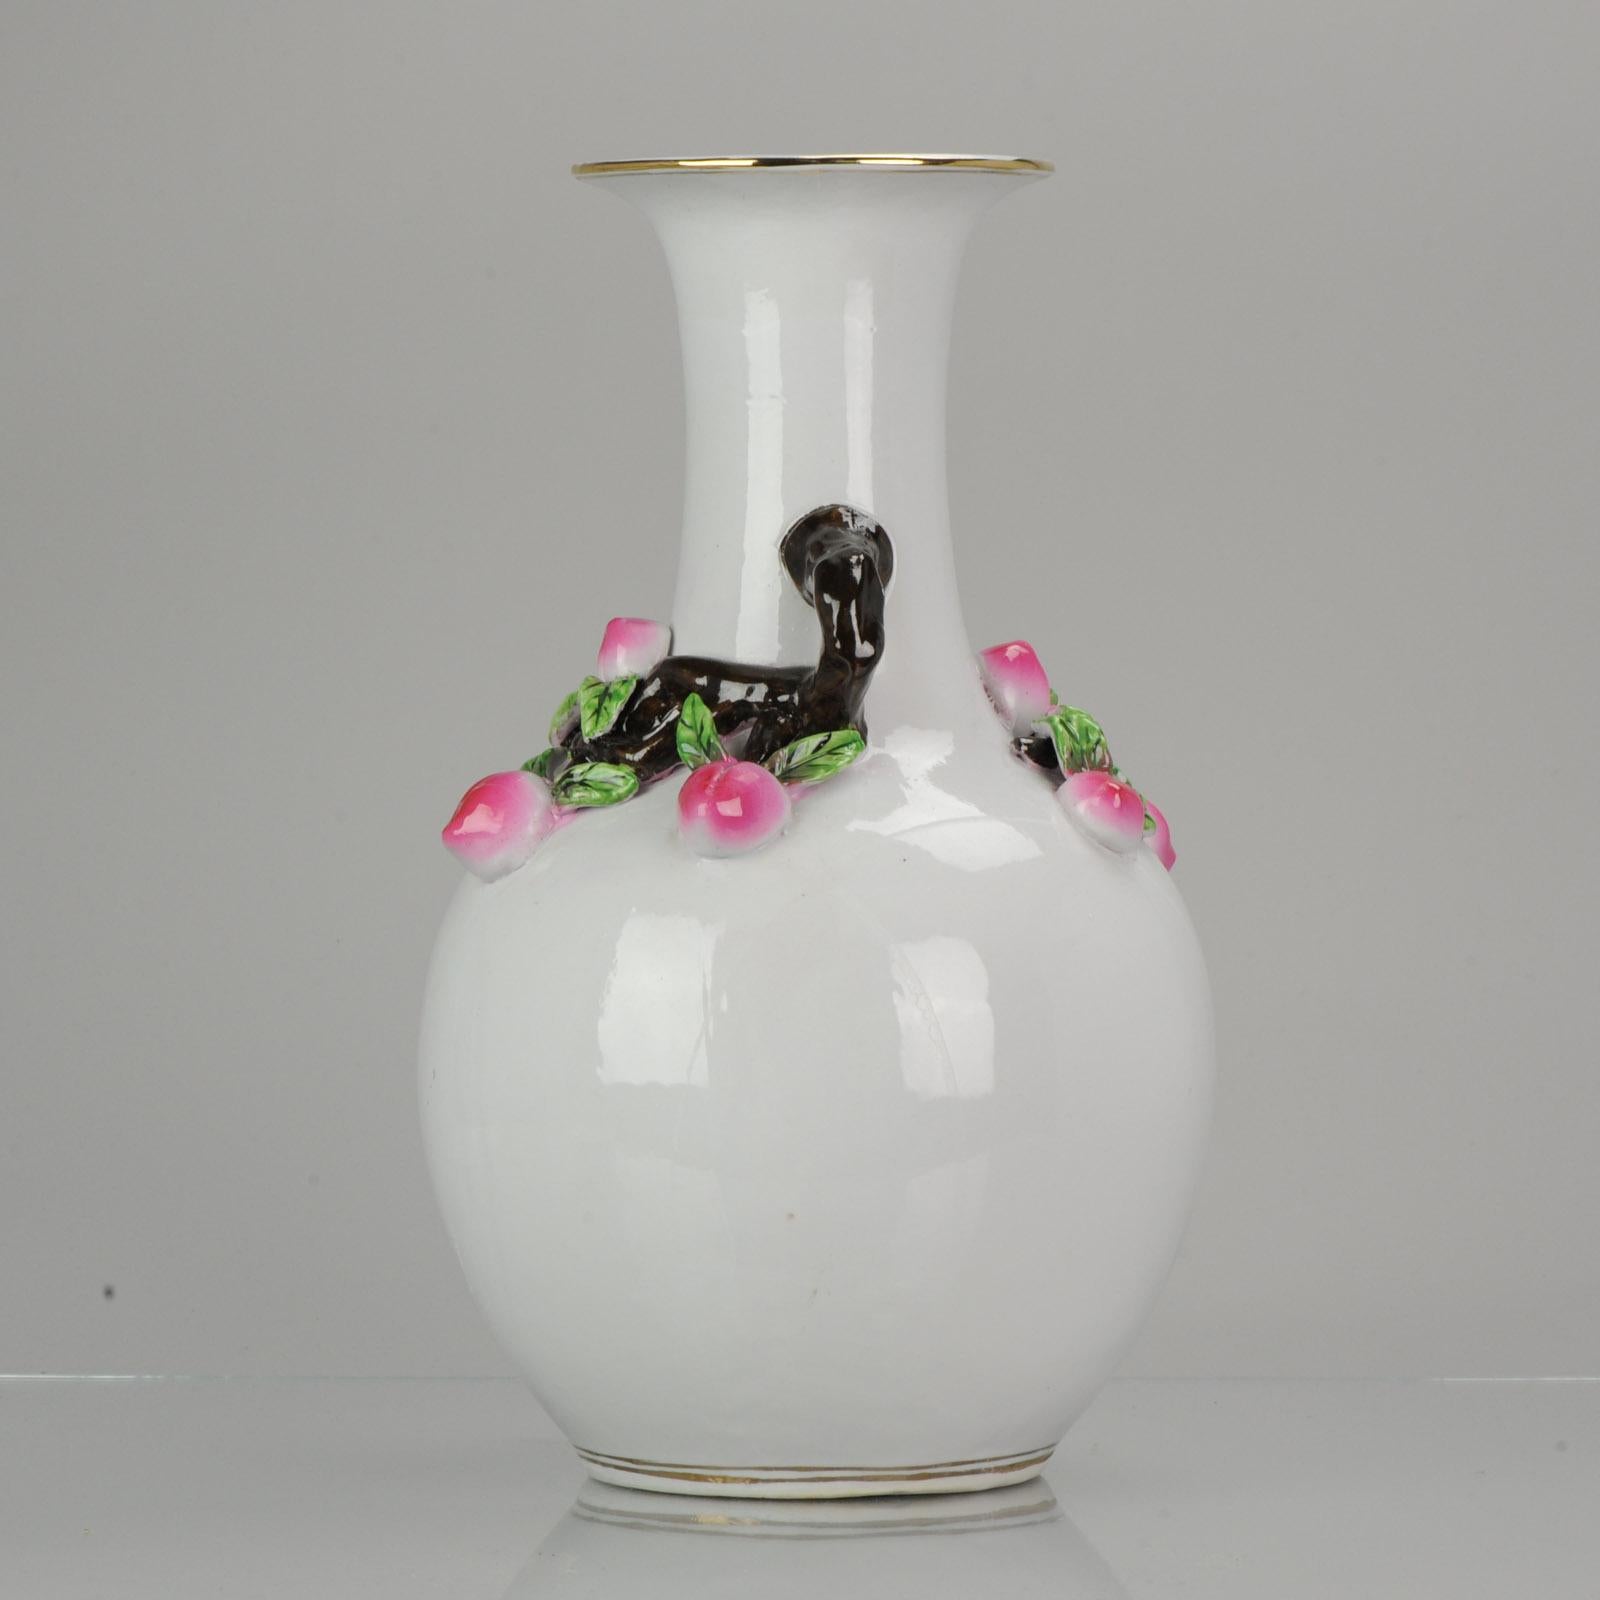 A very nicely decorated vase, 21st century, really nice decoration. Probably this is a modern 21st century vase or may be, late 20th century

Condition:
Overall condition perfect, no damages. Size: 360mm

Period:
21st century.
    